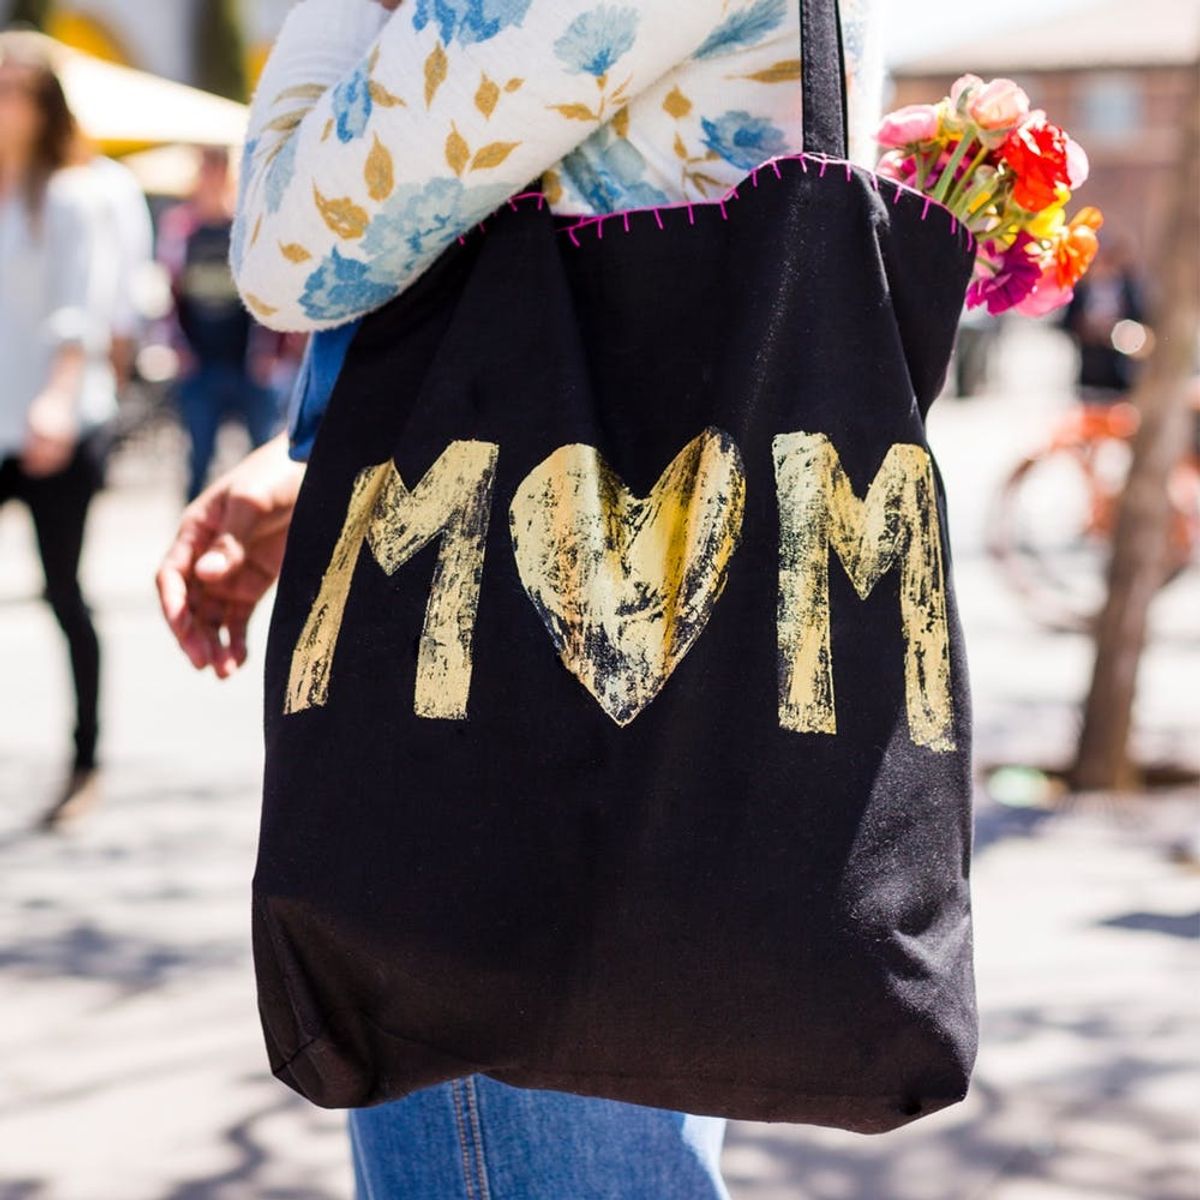 Personalize a Thoughtful Tote for Mom in Under 30 Minutes